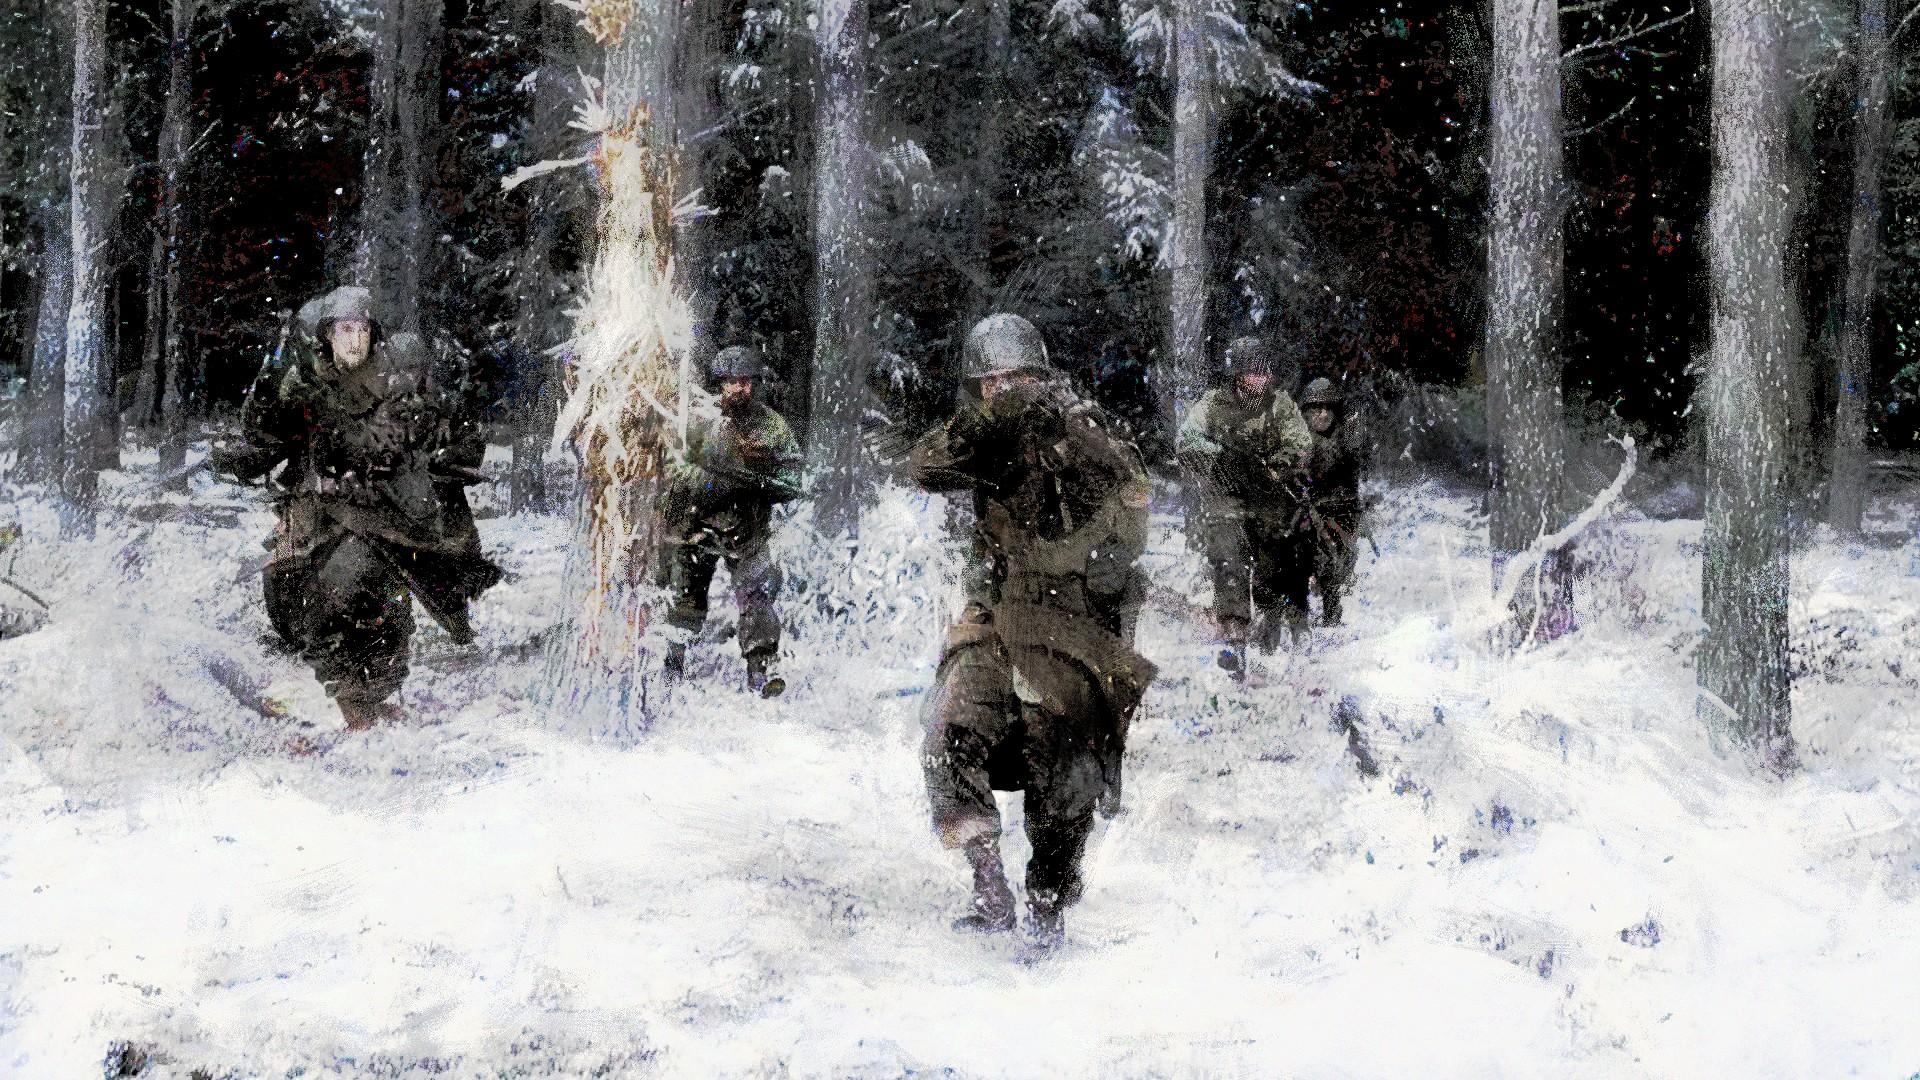 soldiers, snow, trees, army, military, forests, storm, weapons